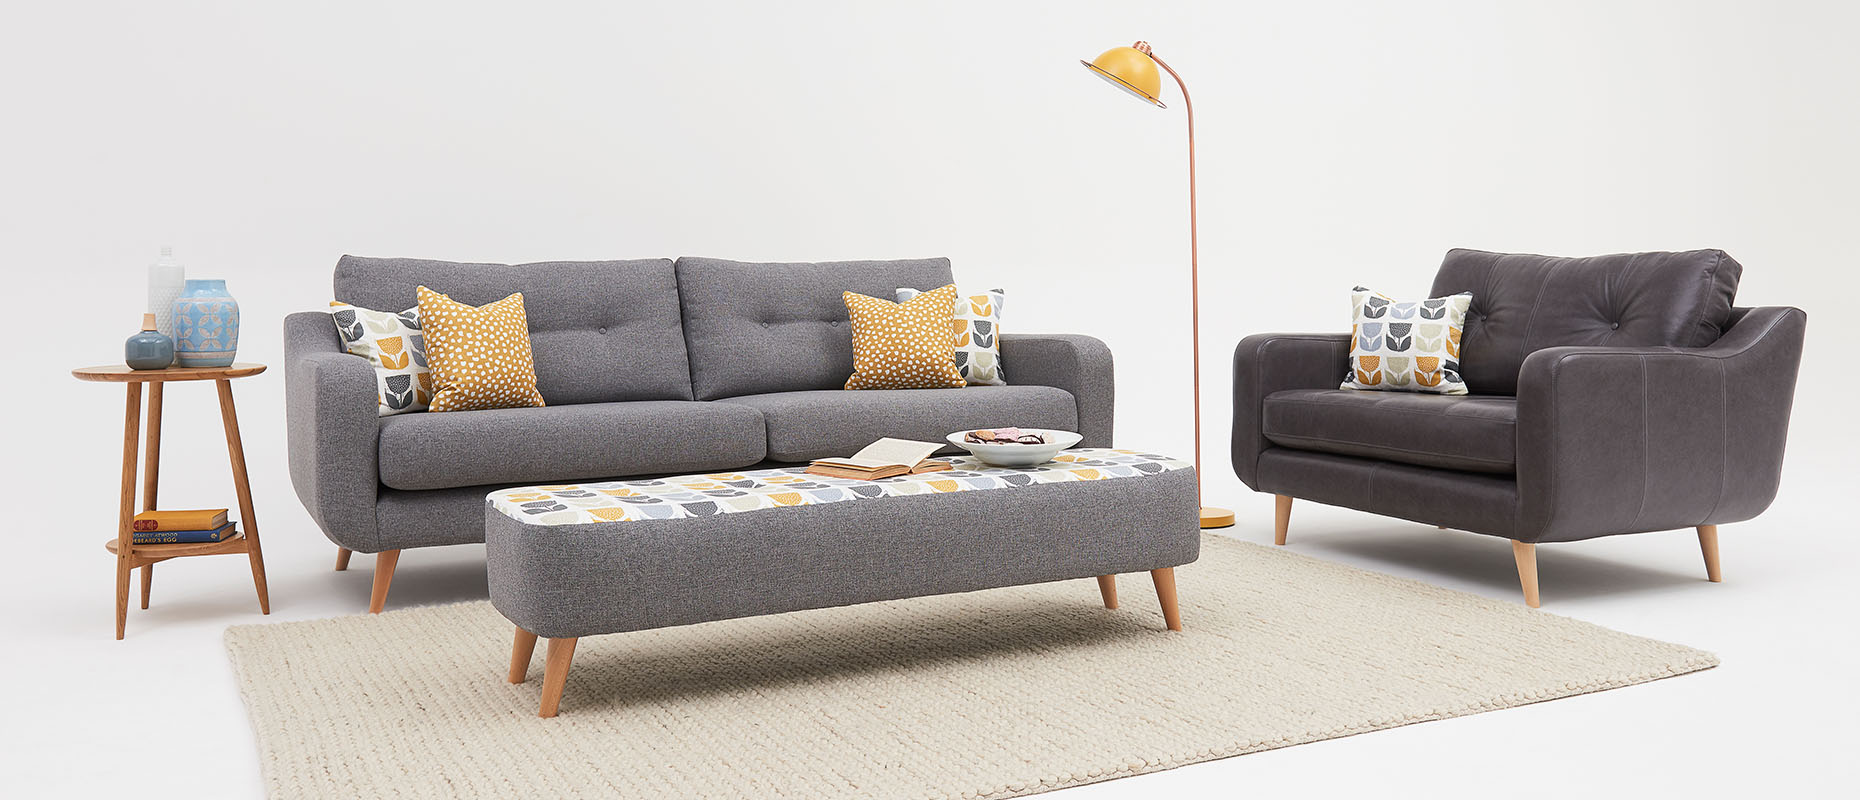 Phoebe sofa collection at Forrest Furnishing